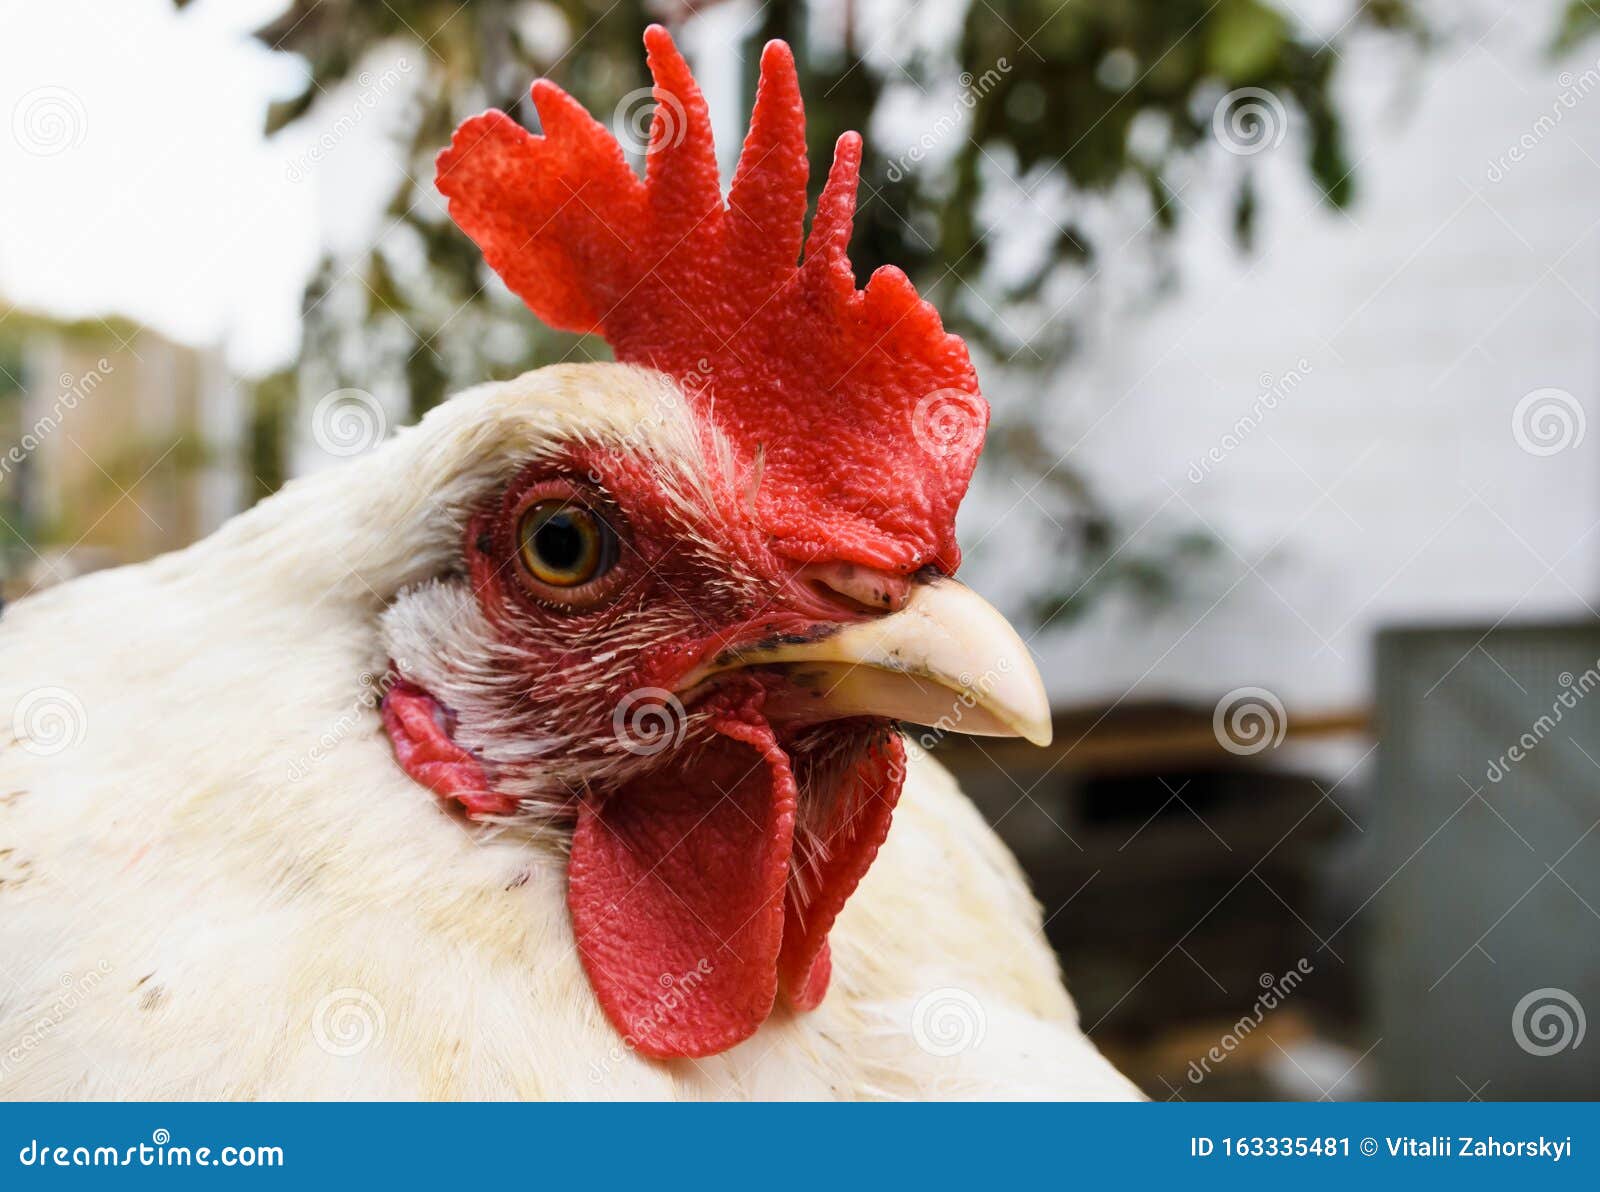 Closeup Head of a White Hen on a Farm Stock Image - Image of field, comb:  163335481